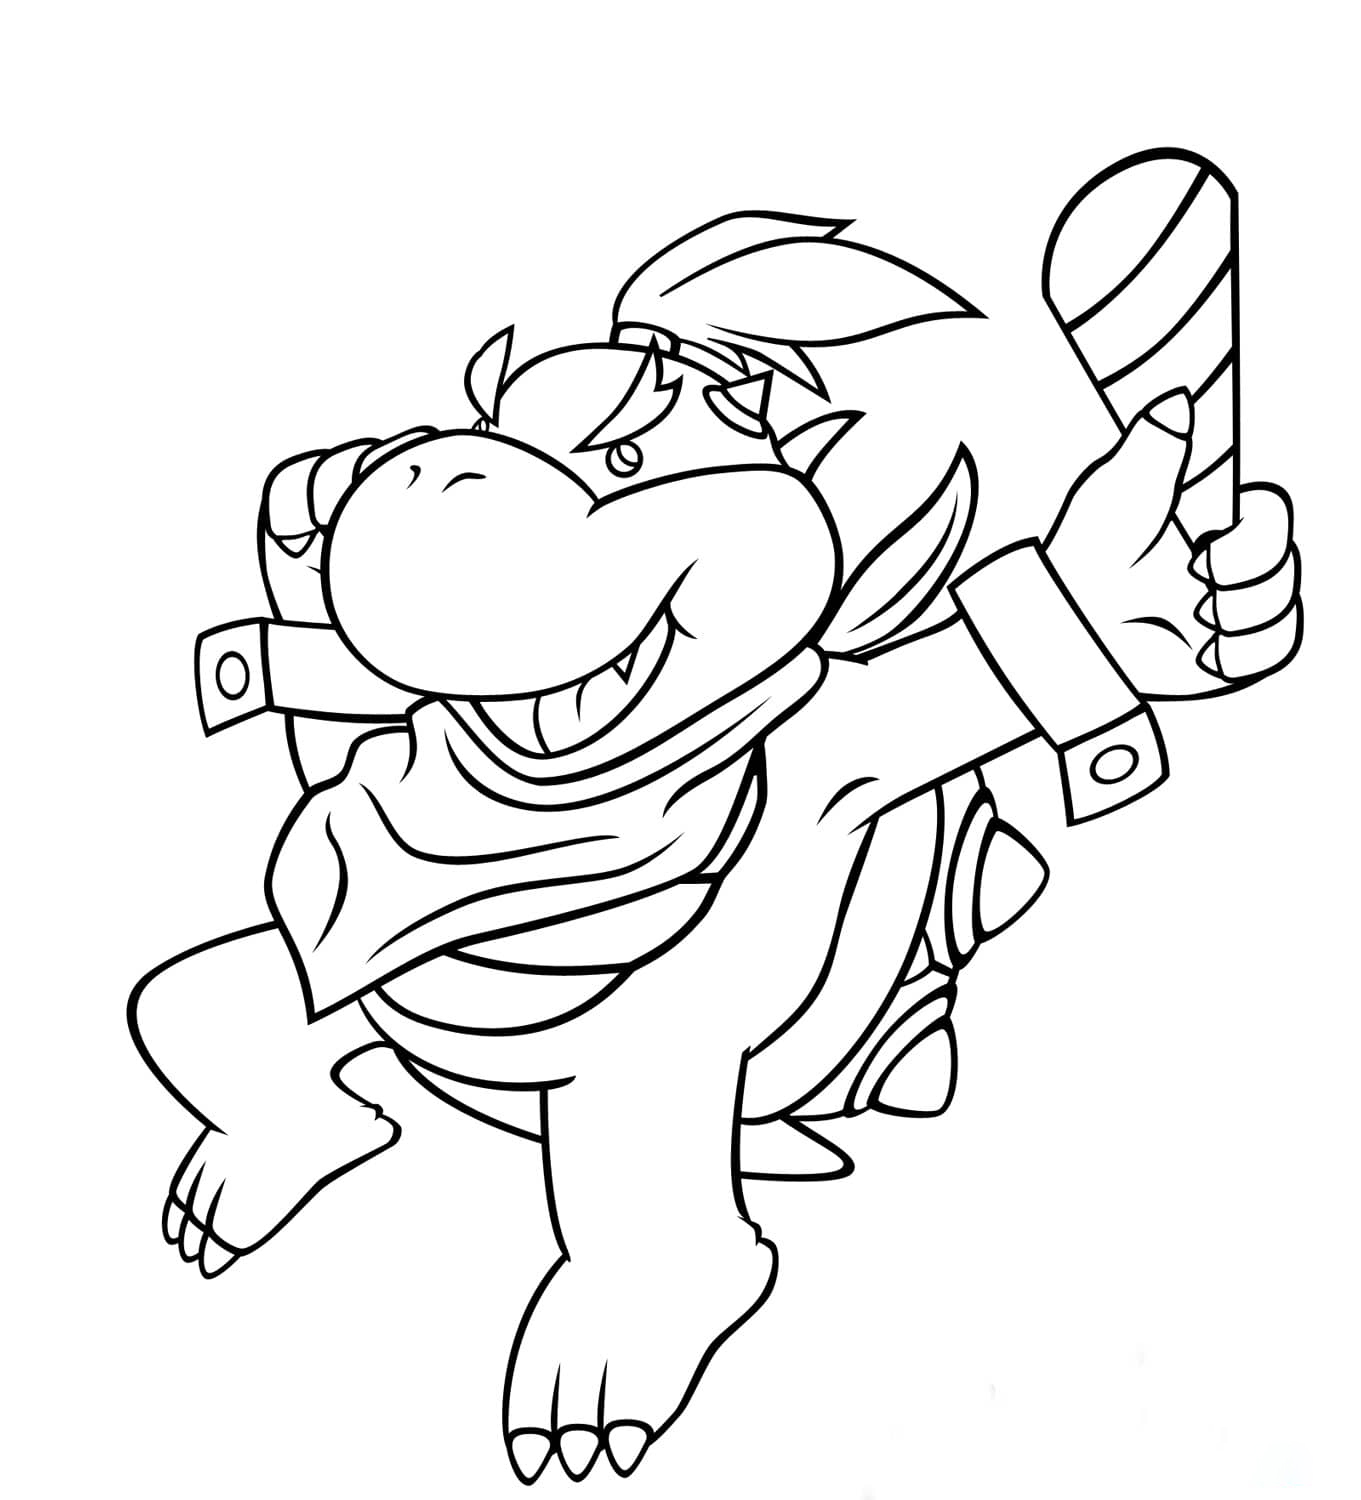 Bowser Jr. is holding torch from Bowser Jr